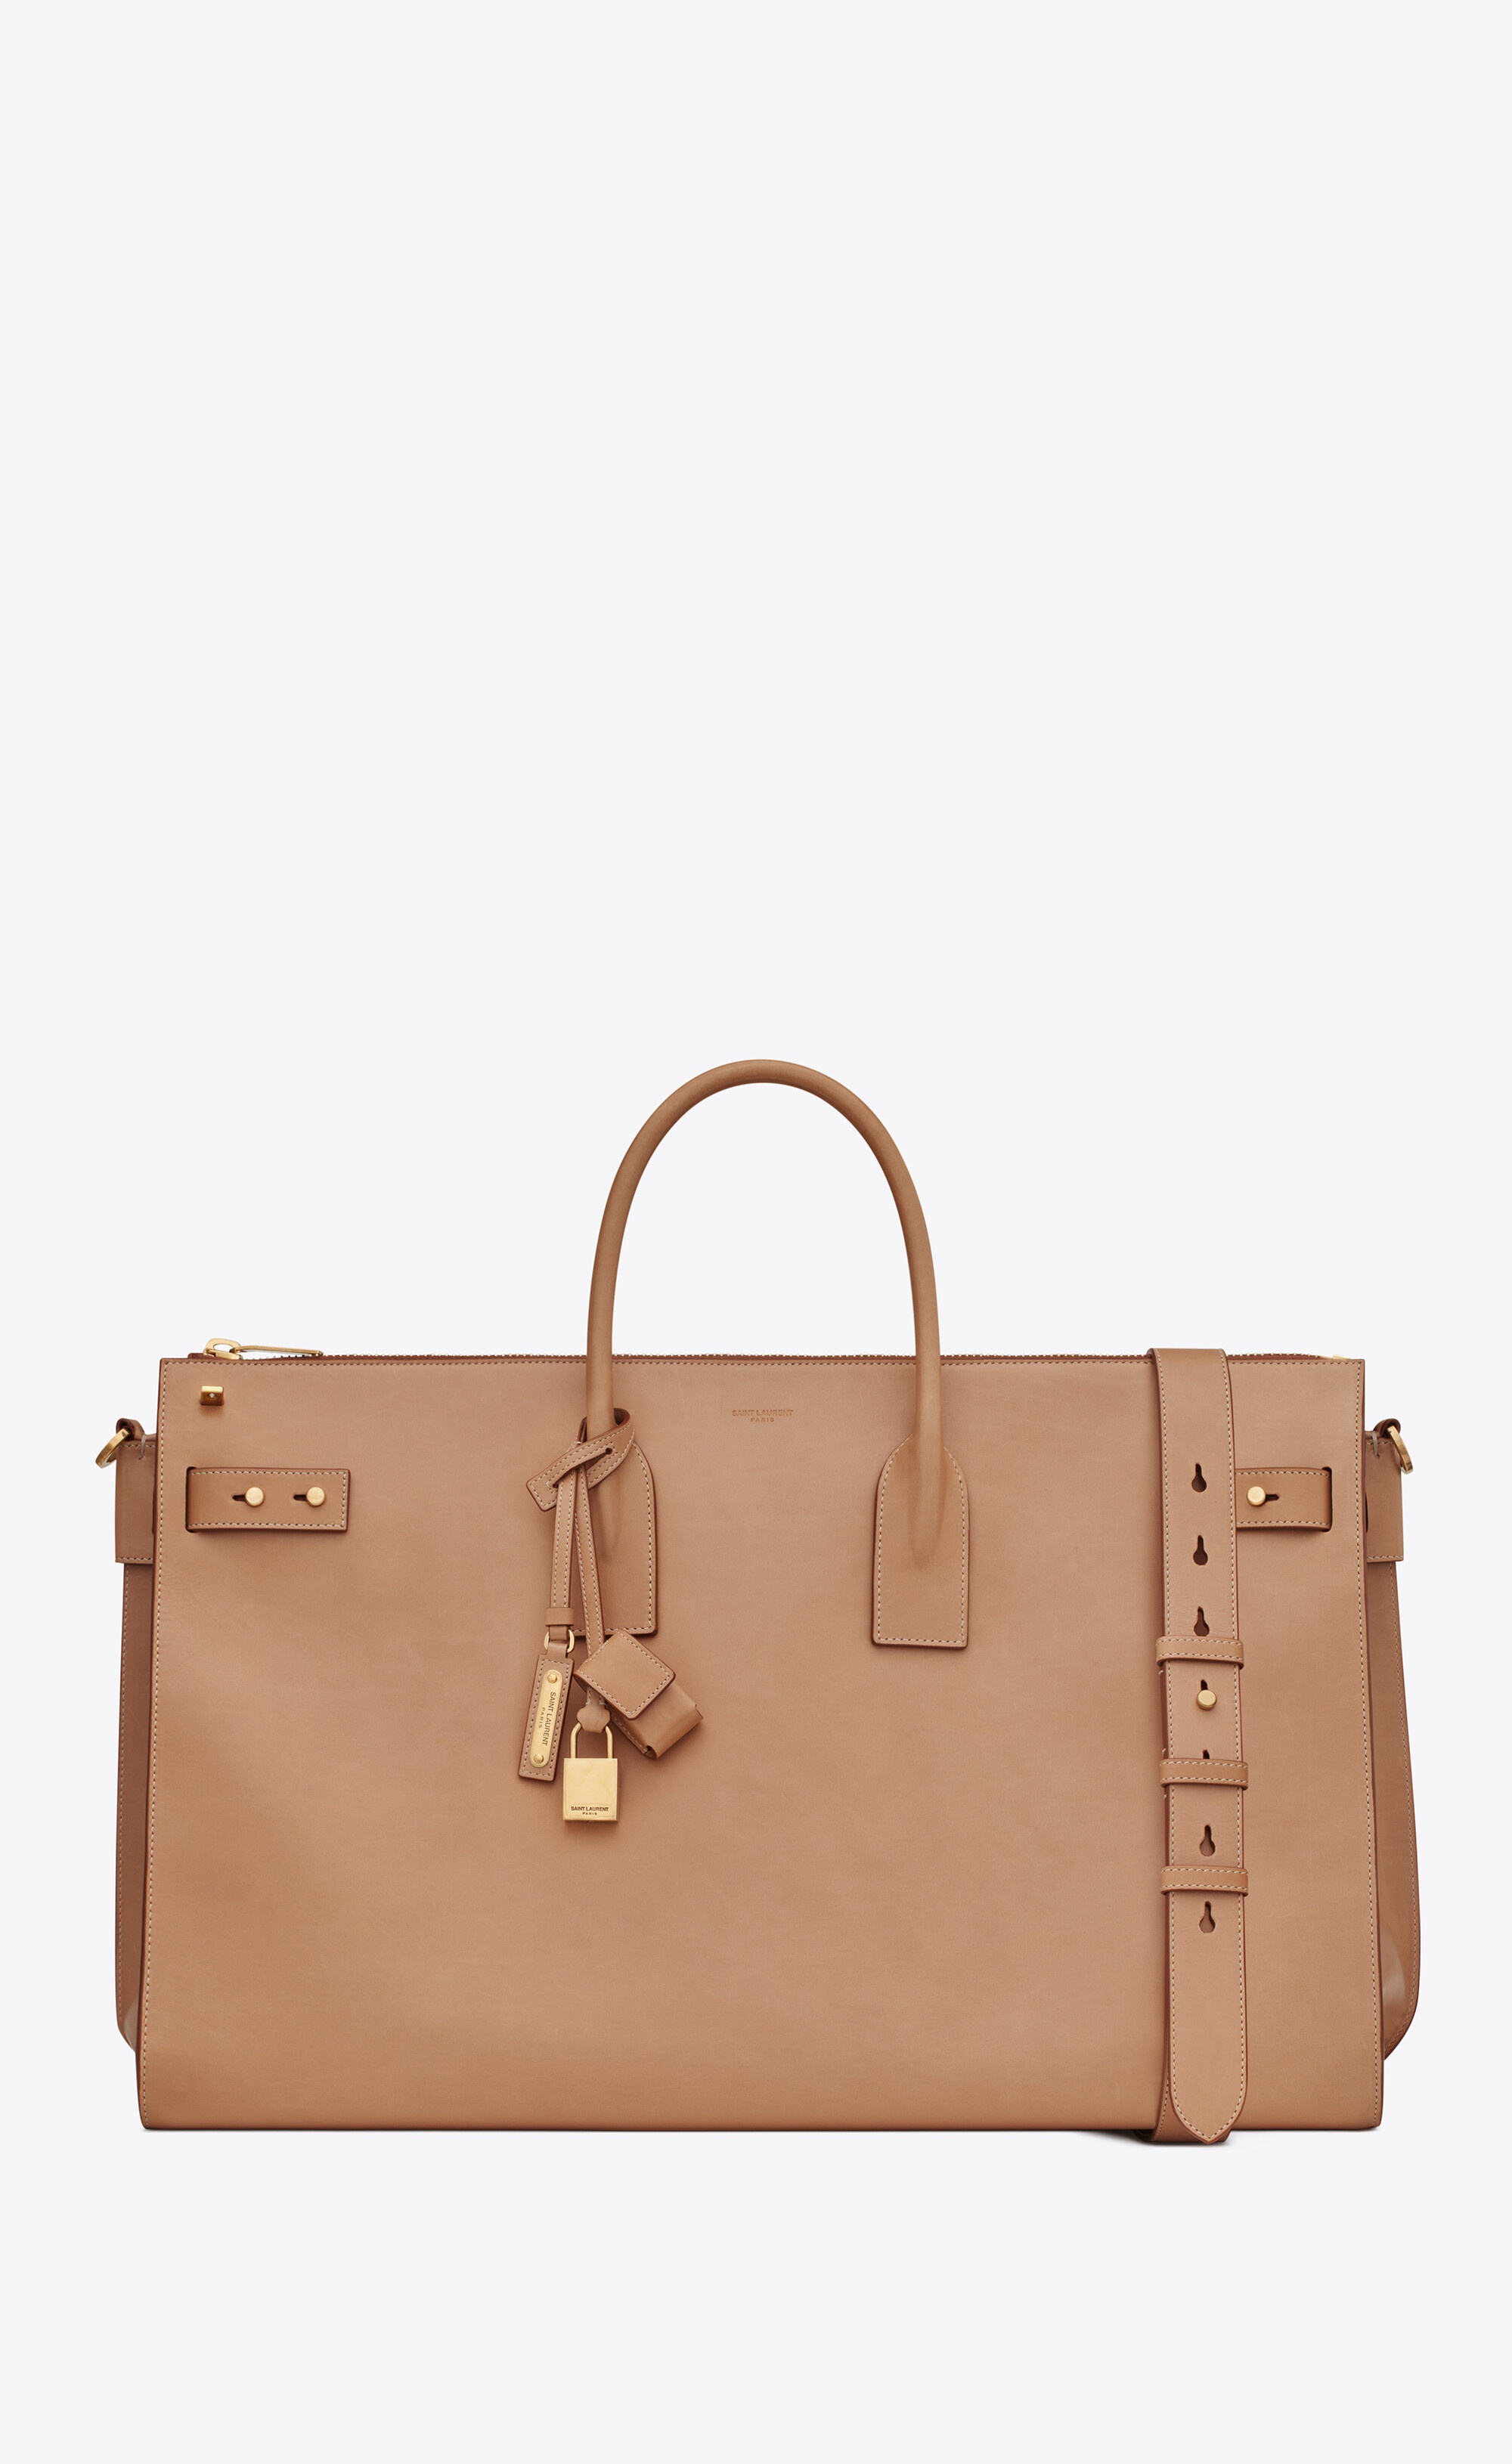 sac de jour 48h duffle bag in vintage vegetable-tanned leather - 1